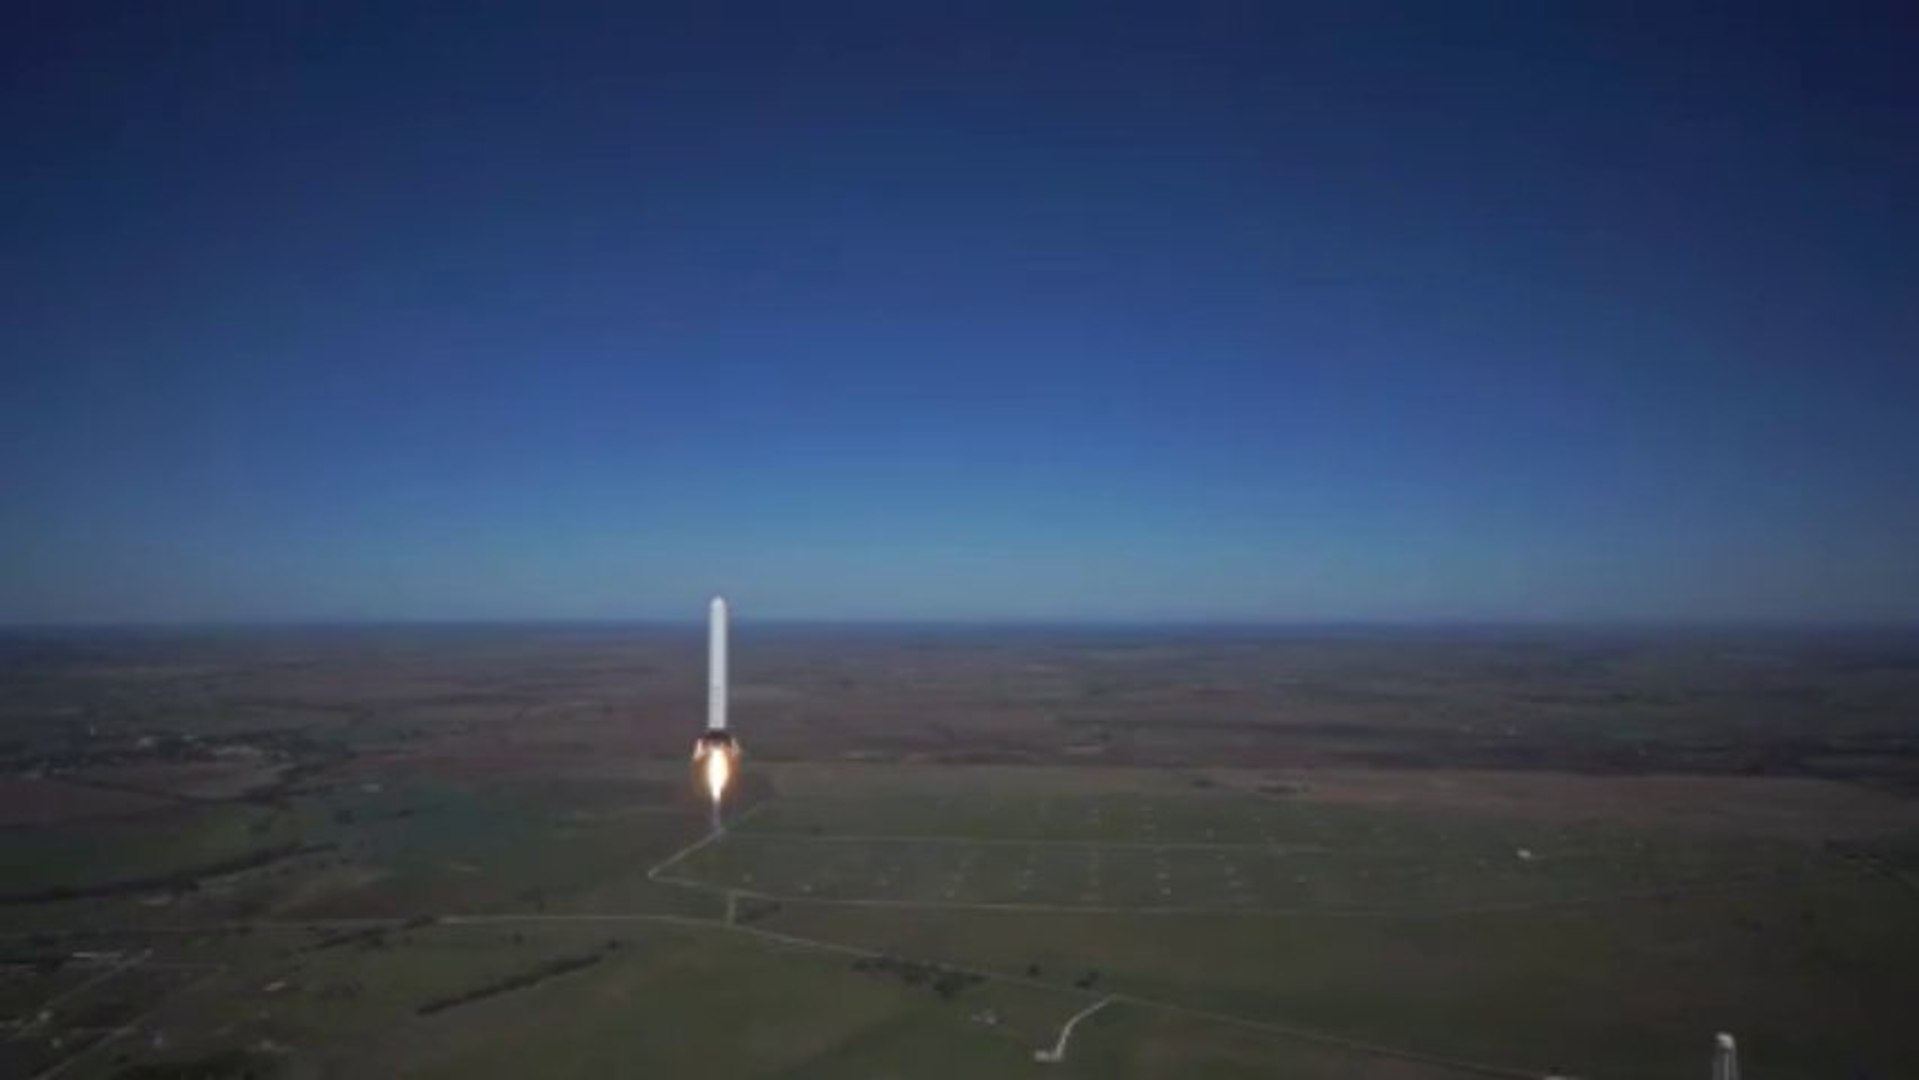 SpaceX just completed its seventh launch of the Grasshopper 744m mission. This launch was a test of 